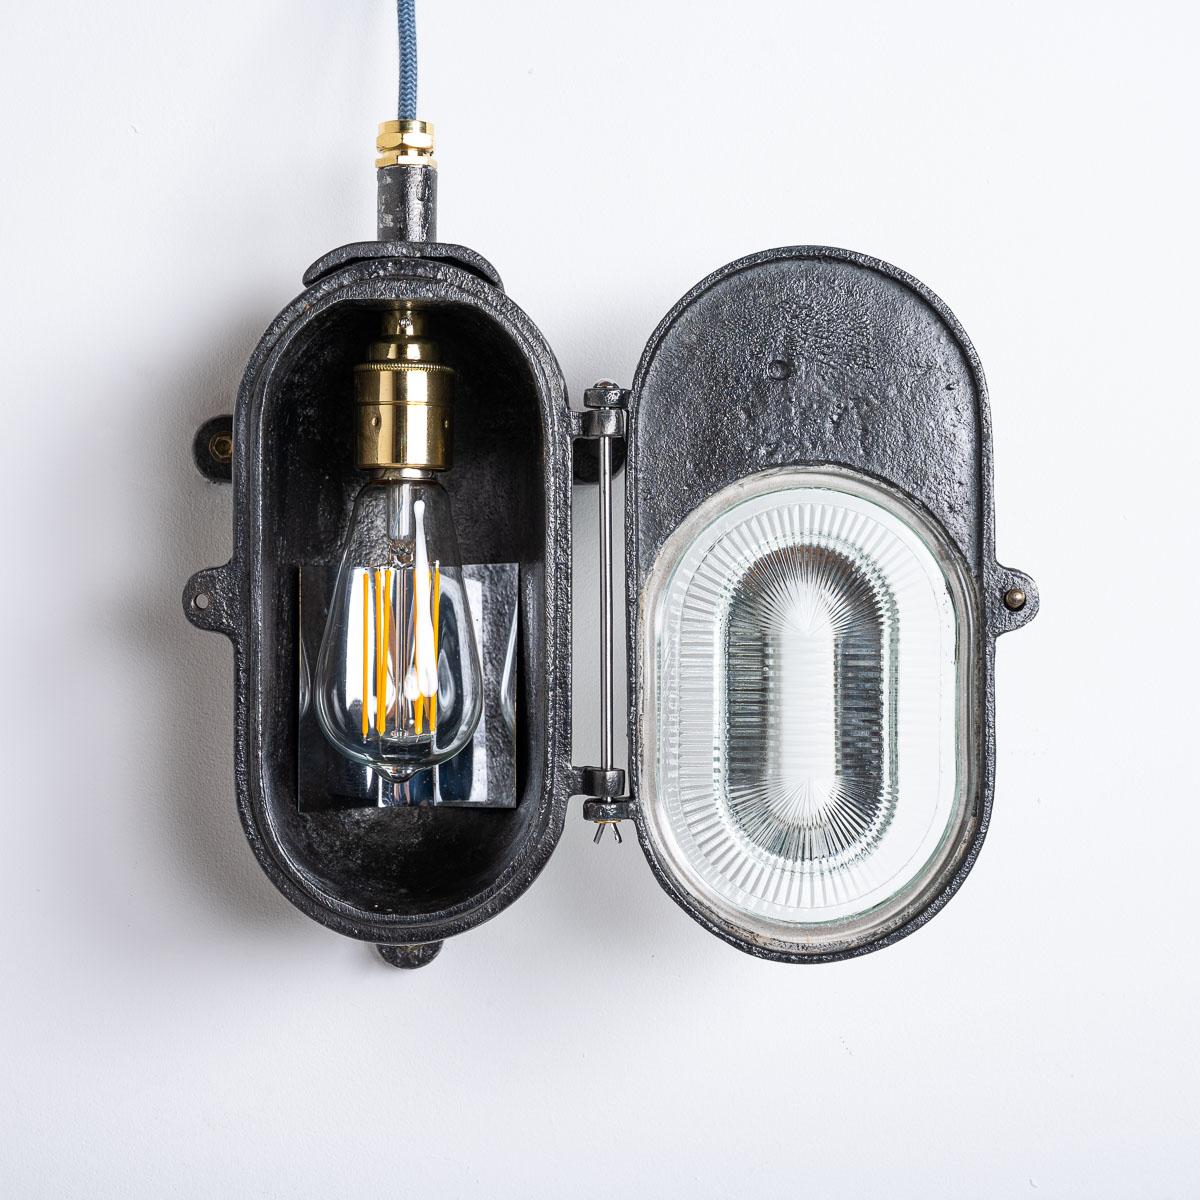 Stunning Heavy Cast Industrial Bulkhead light by Heyes & Co Ltd

A rare oversized heavy industrial bulkhead wall lights manufactured by Heyes & Company of Wigan circa 1950.

Originally installed in the 1950's these extreme wall lights were part of a